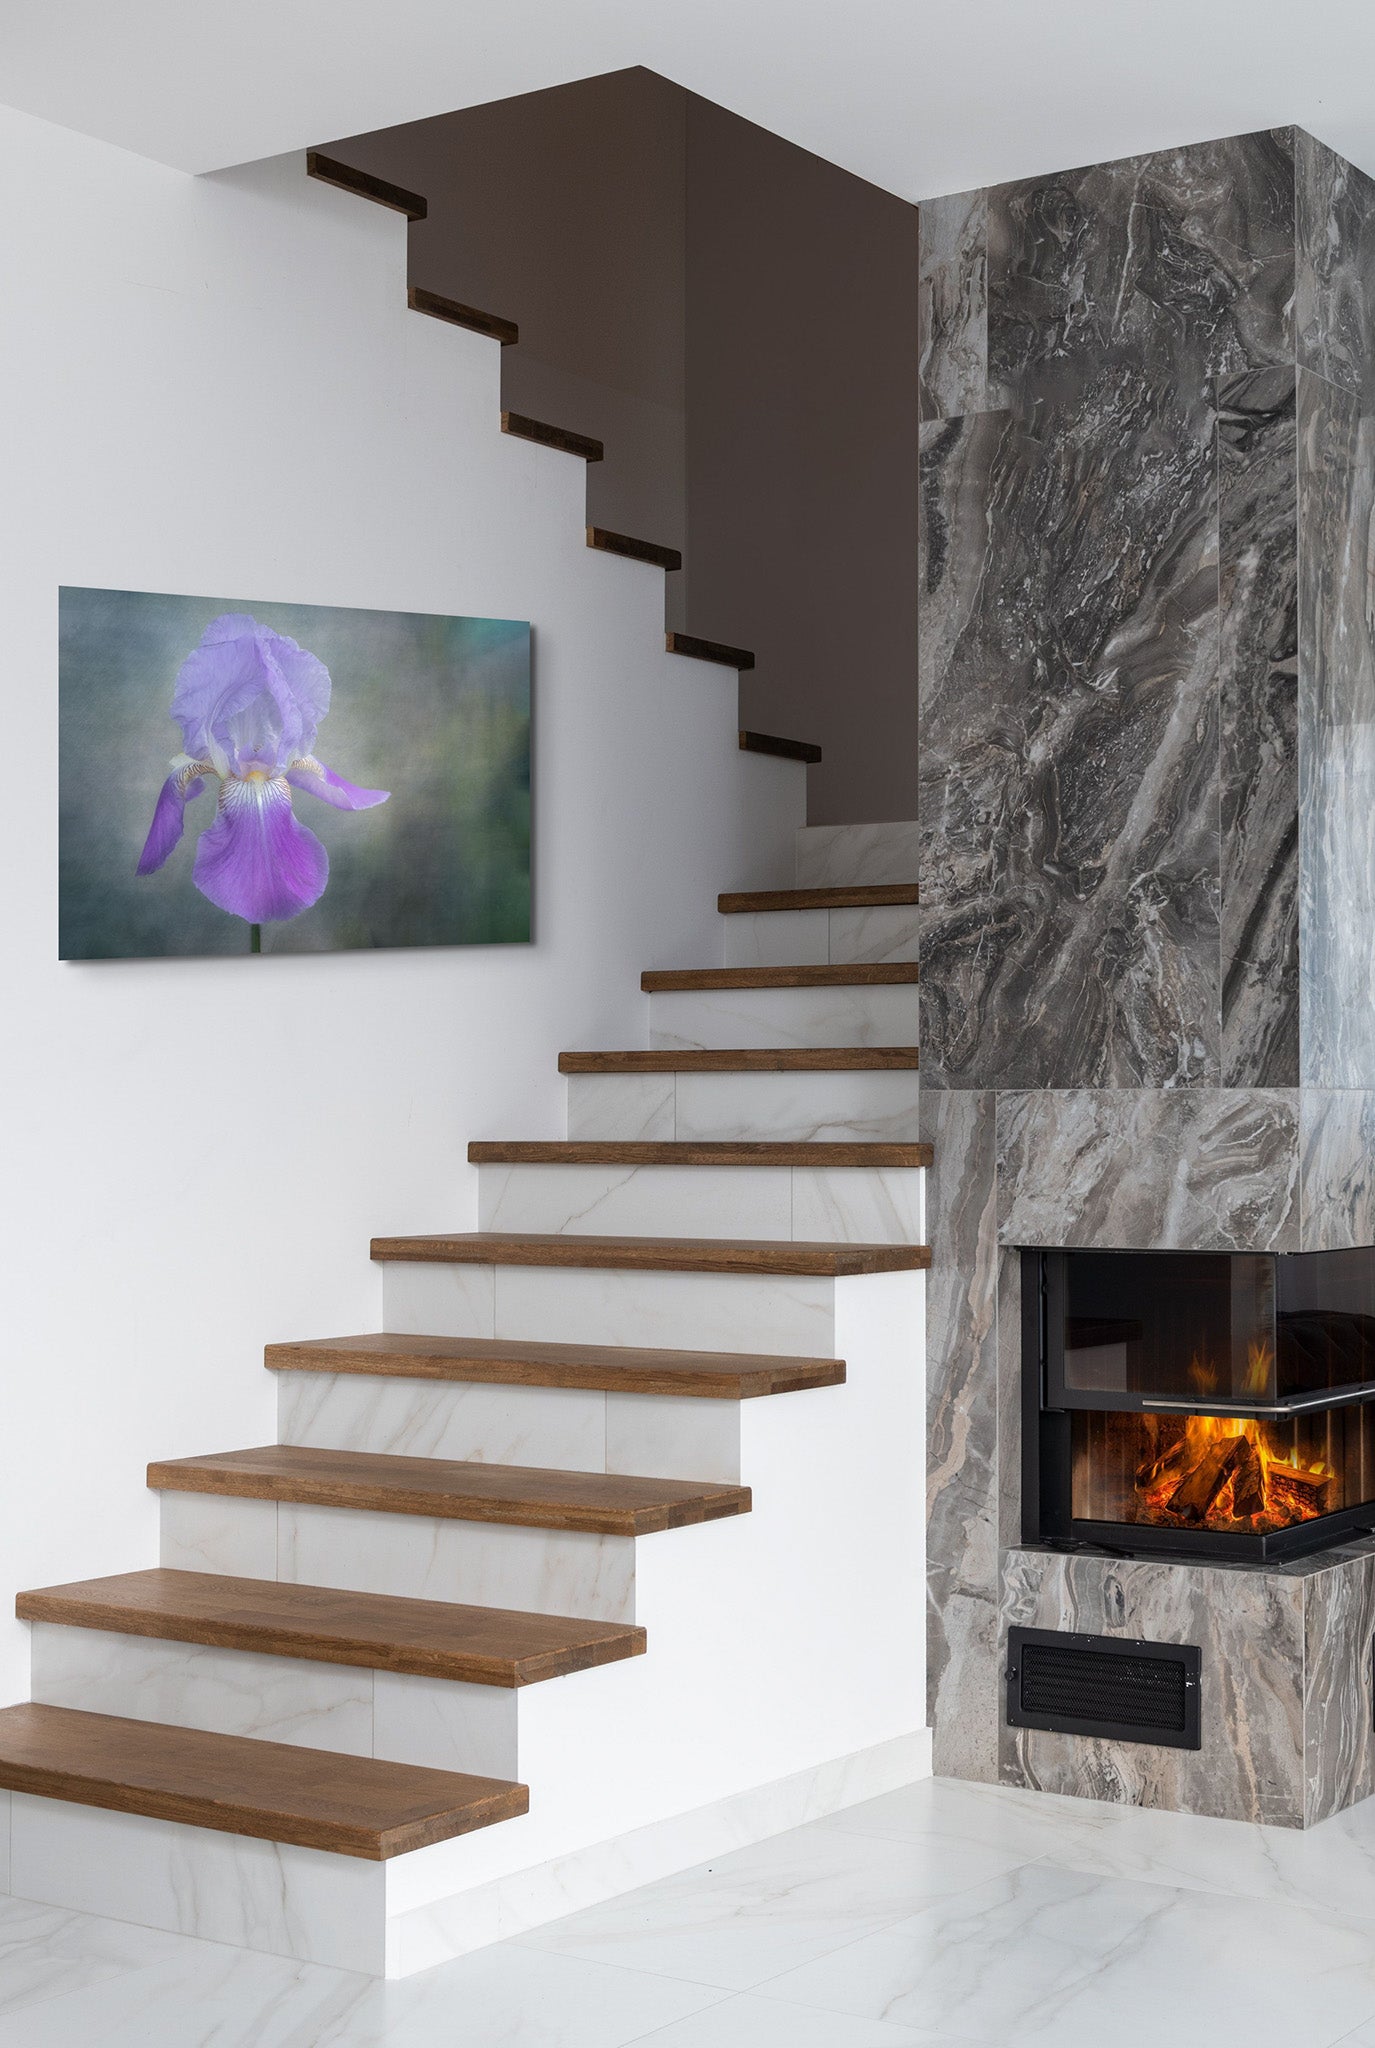 Picture hanging on the wall of a living room. There is a fireplace with a fire going and a staircase. The picture is on the wall by the staircase. The picture is a fine art flower photograph of a purple Iris flower titled "Empowered" by Cameron Dreaux of Dreaux Fine Art.